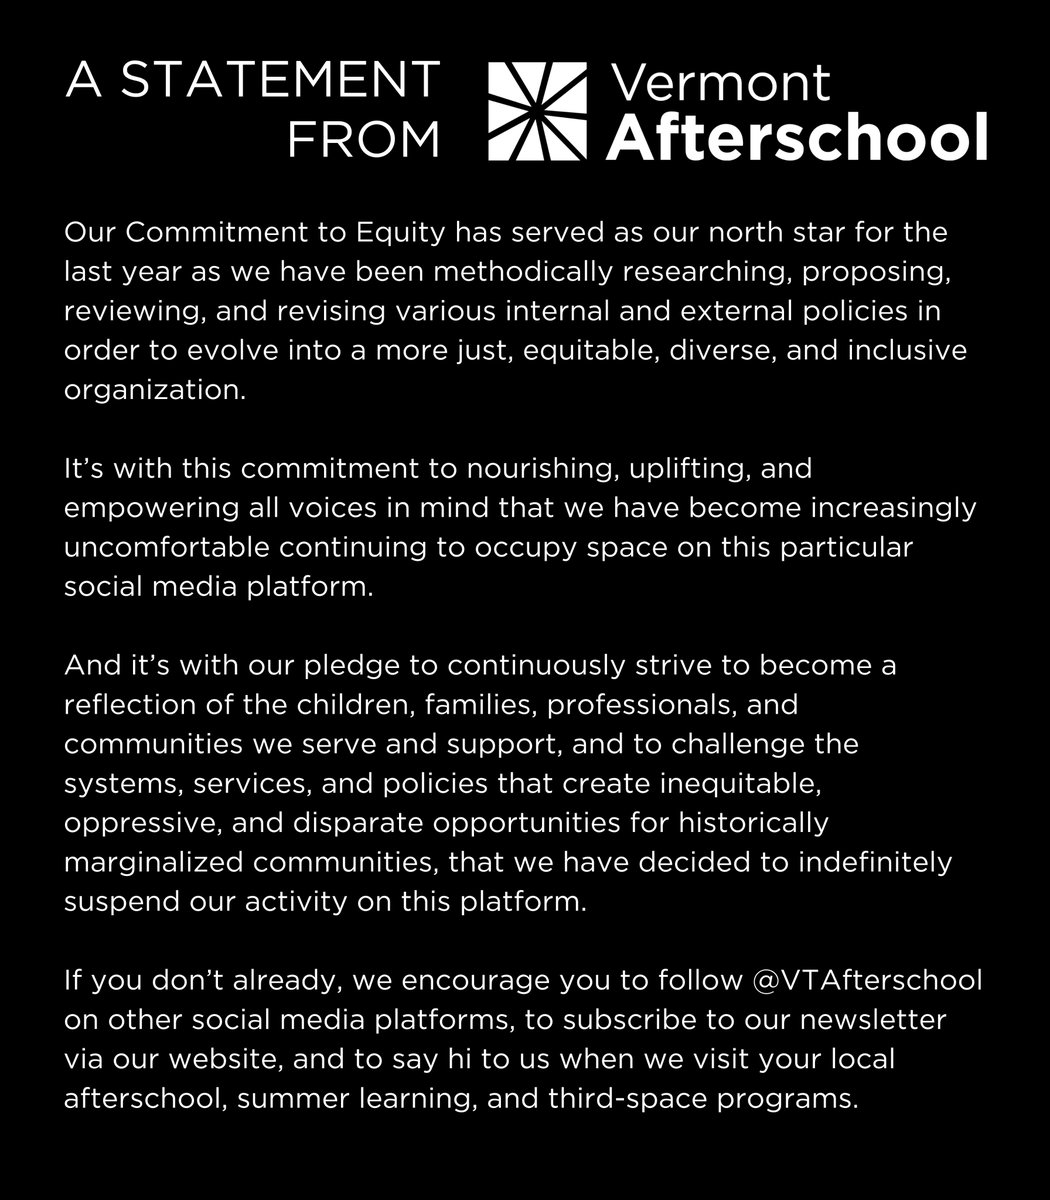 Vermont Afterschool will no longer be posting on Twitter. Here's why. And here's where else you'll find us: Facebook: facebook.com/vtafterschool Instagram: instagram.com/vtafterschool YouTube: youtube.com/@vtafterschool LinkedIn: linkedin.com/company/vtafte… Website: vermontafterschool.org